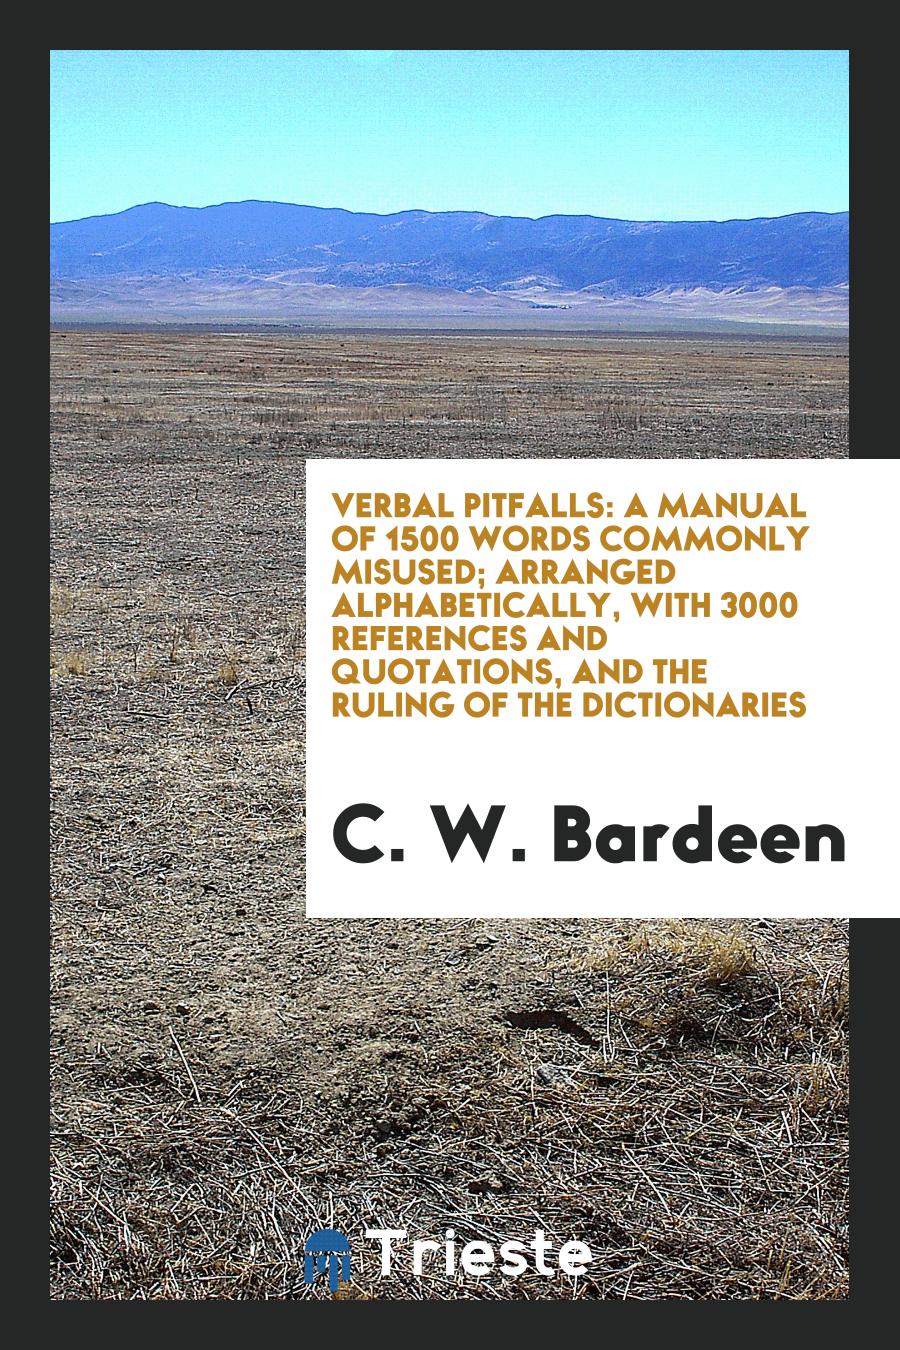 Verbal pitfalls: a manual of 1500 words commonly misused; Arranged alphabetically, with 3000 references and quotations, and the ruling of the dictionaries